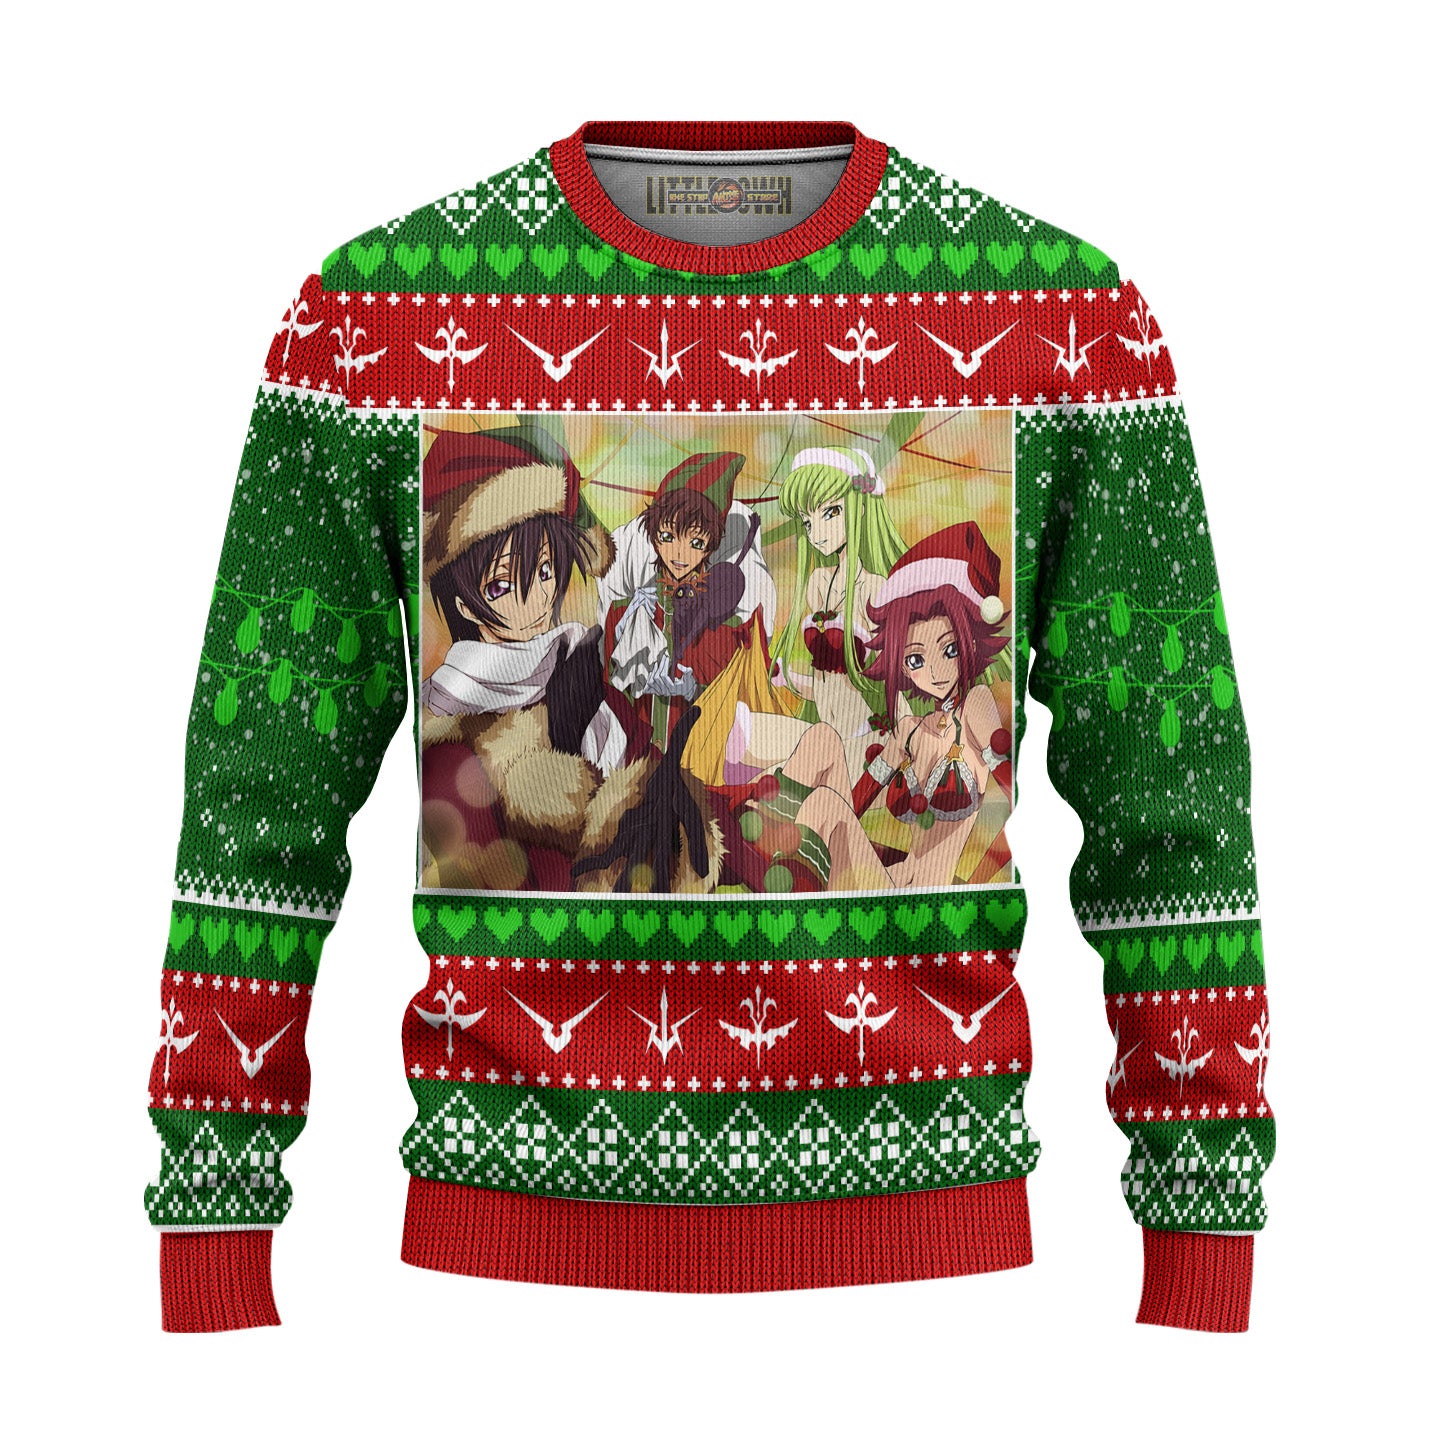 Code Geass Anime Ugly Christmas Sweater Custom Gift For Fans